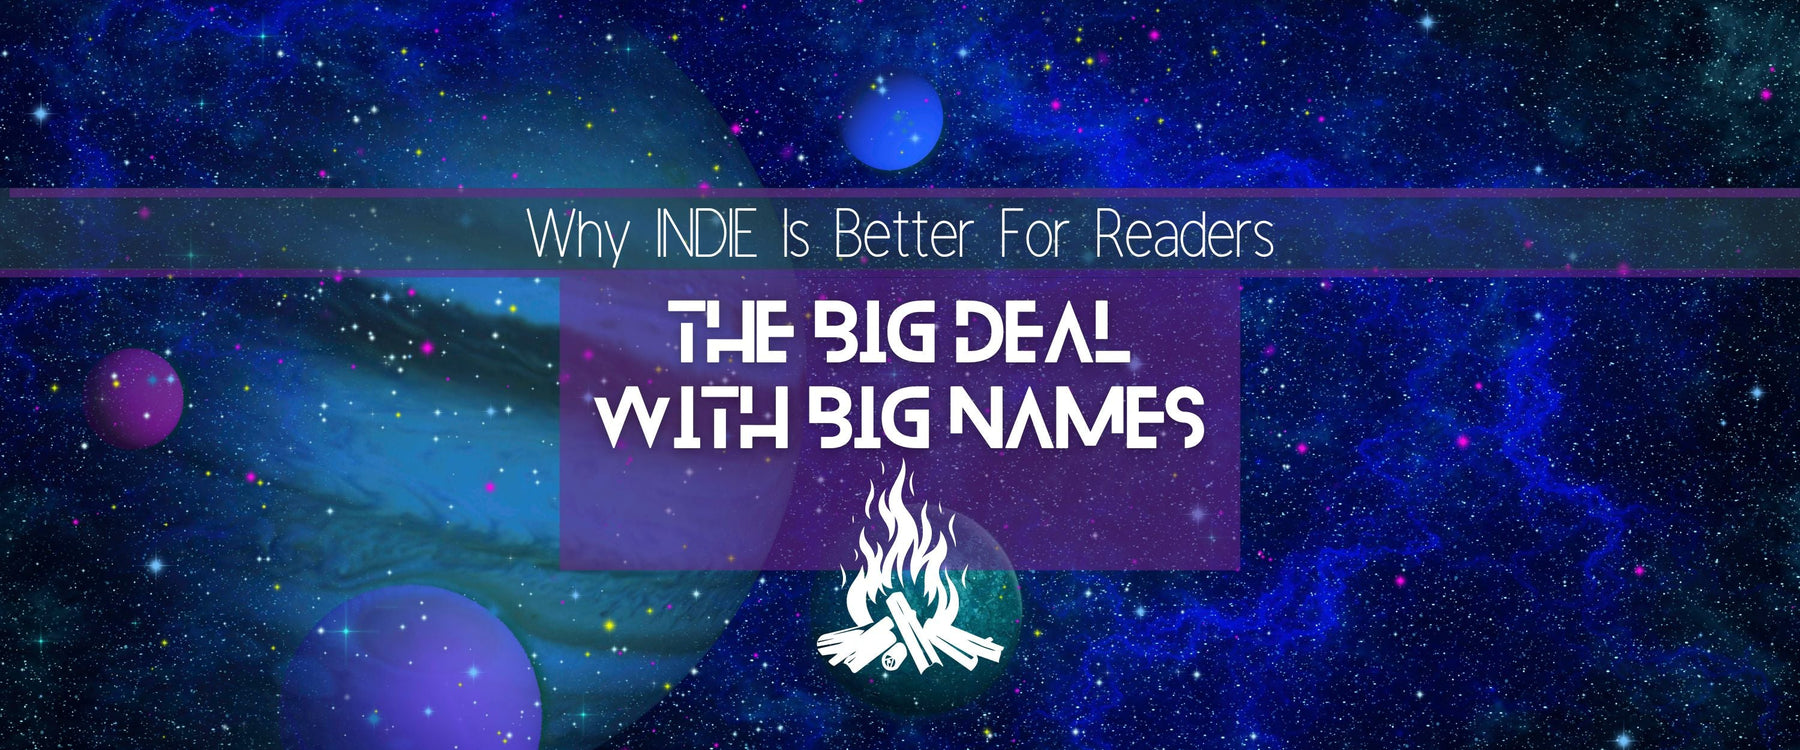 The Big Deal With Big Names | INDIE